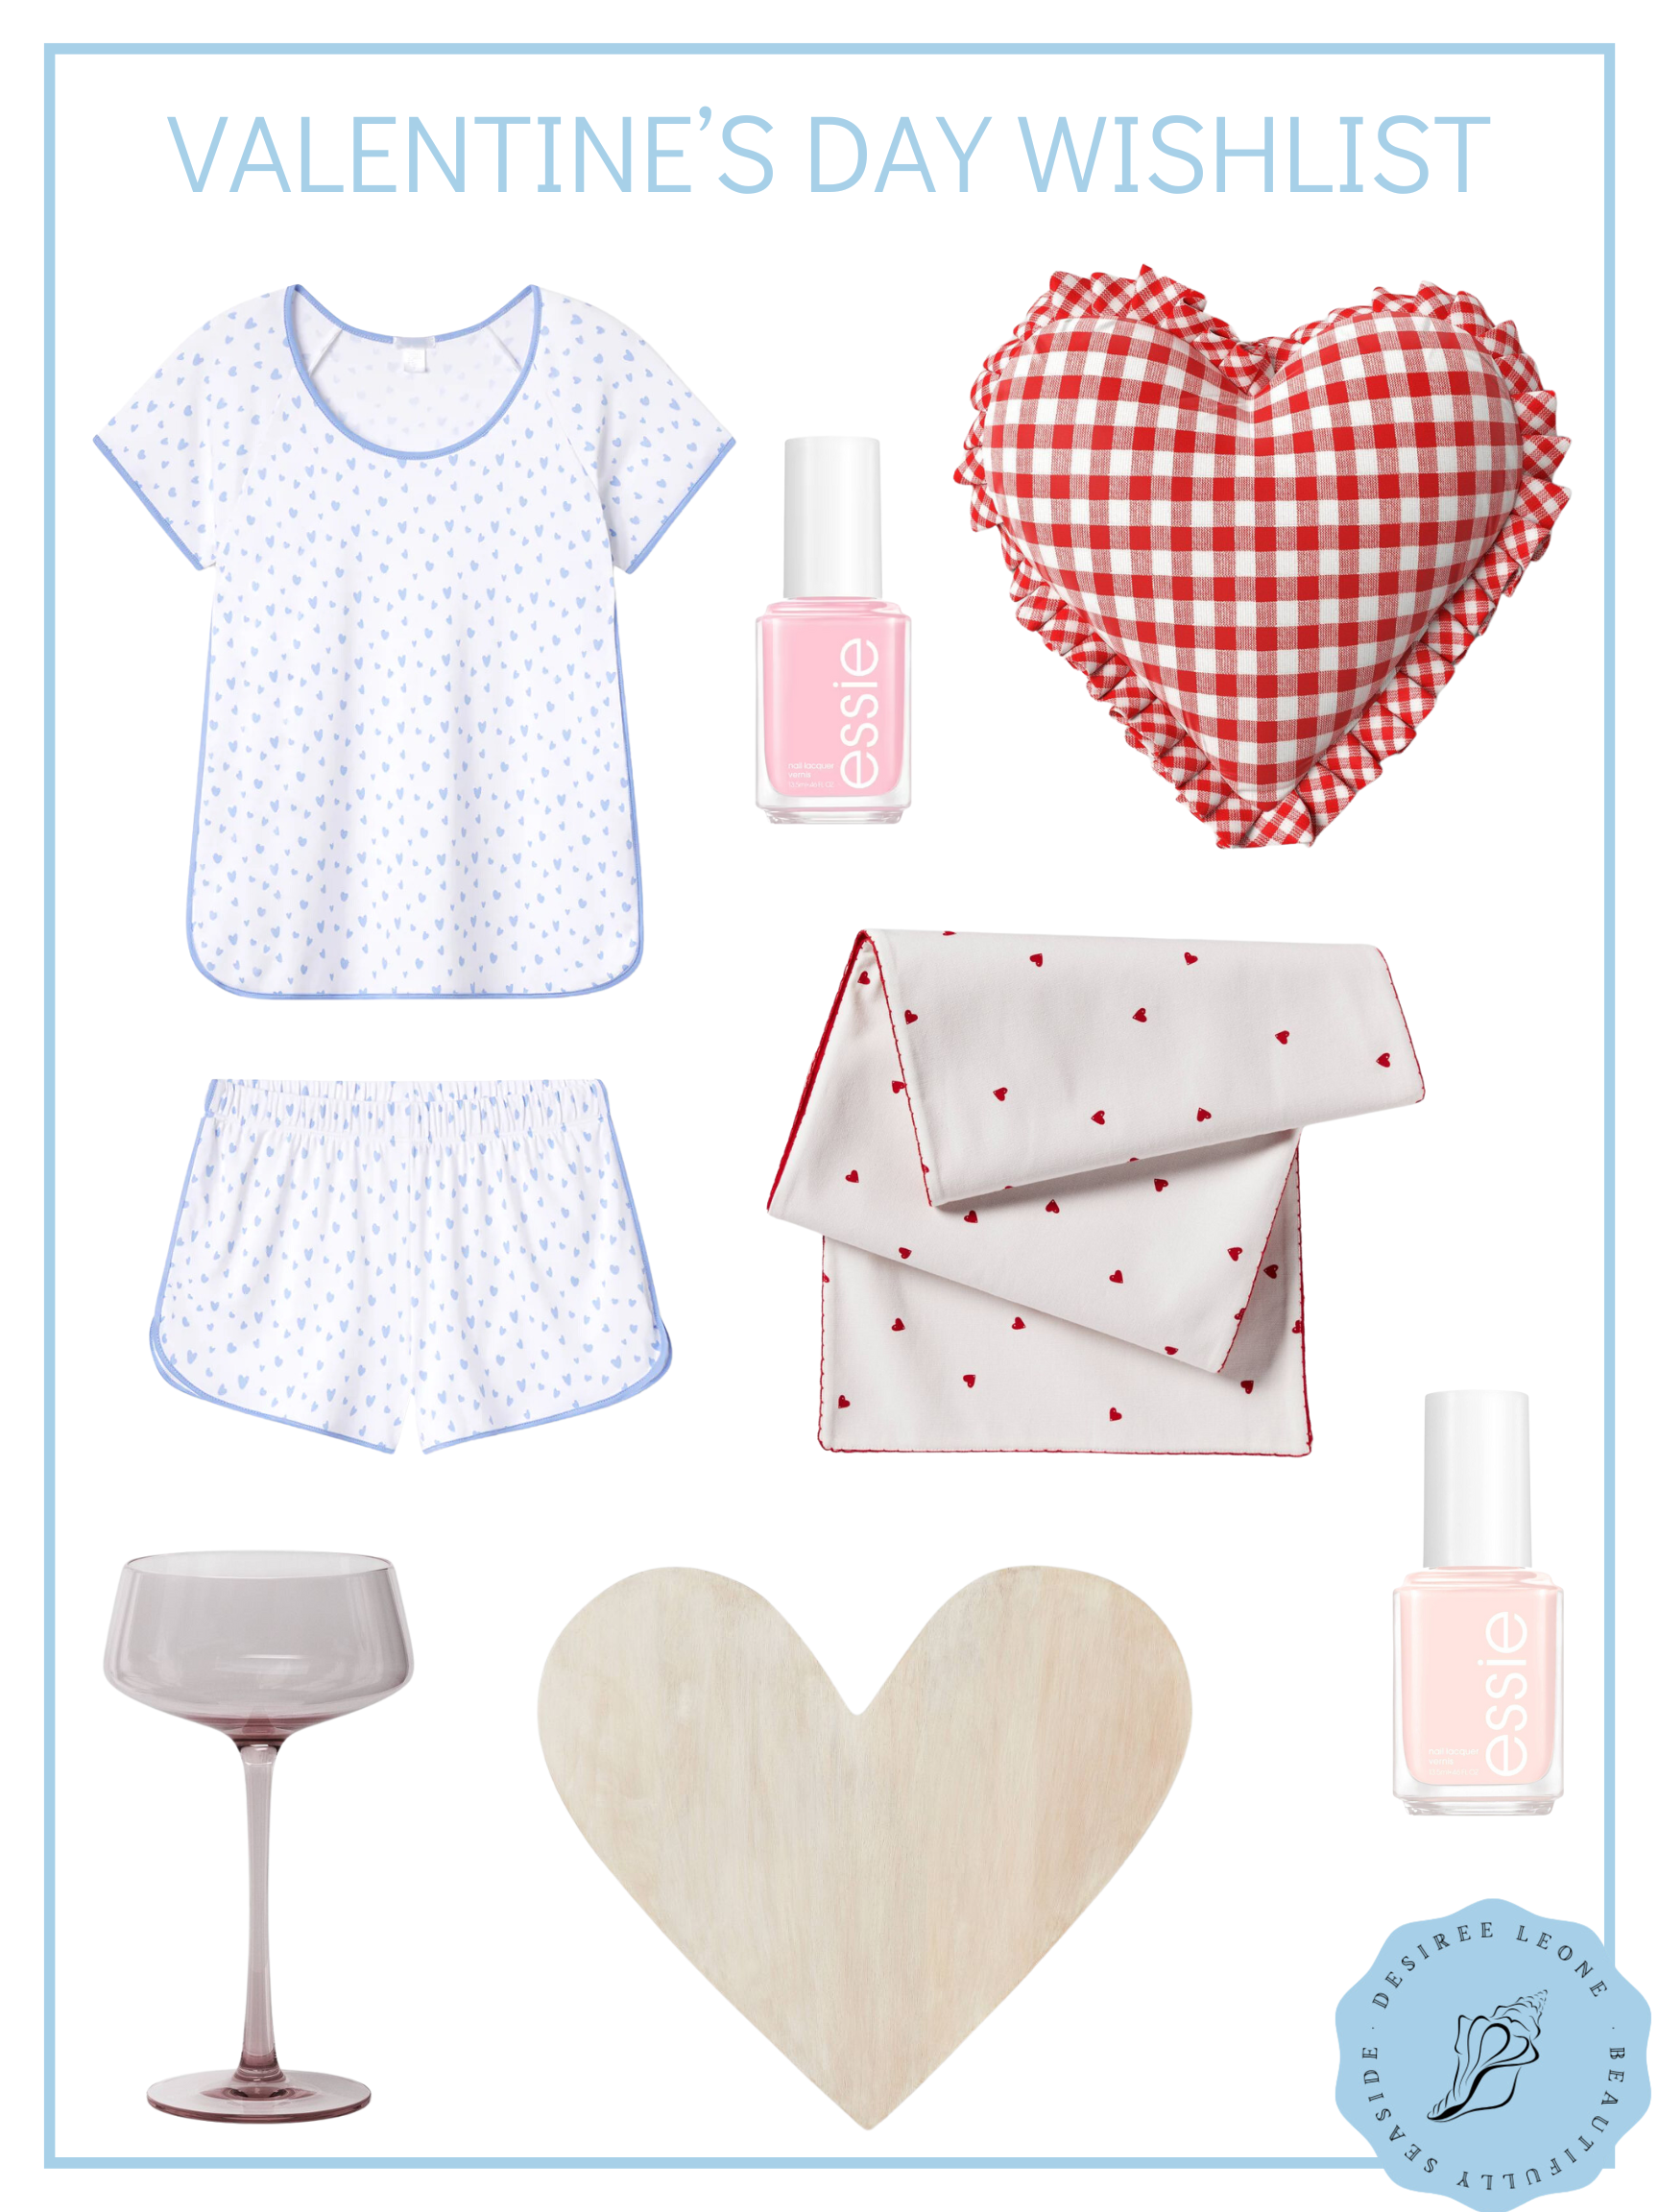 Desiree Leone of Beautifully Seaside shares a Valentine's Day Wishlist of items that are so cute and perfect for the month of February.